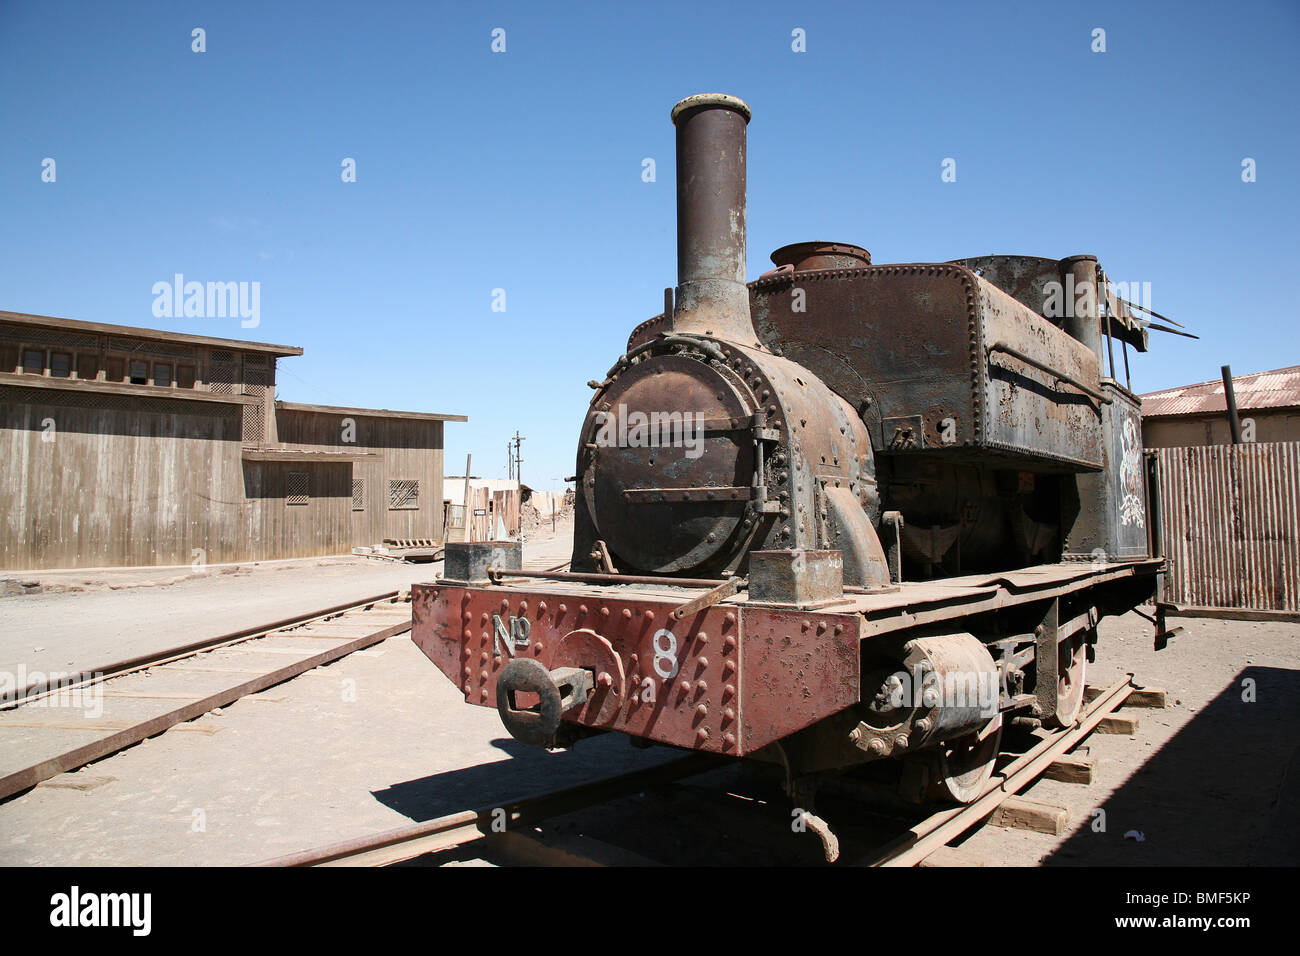 An old disused mining train deteriorating at Humberstone near Iquique, Chile Stock Photo